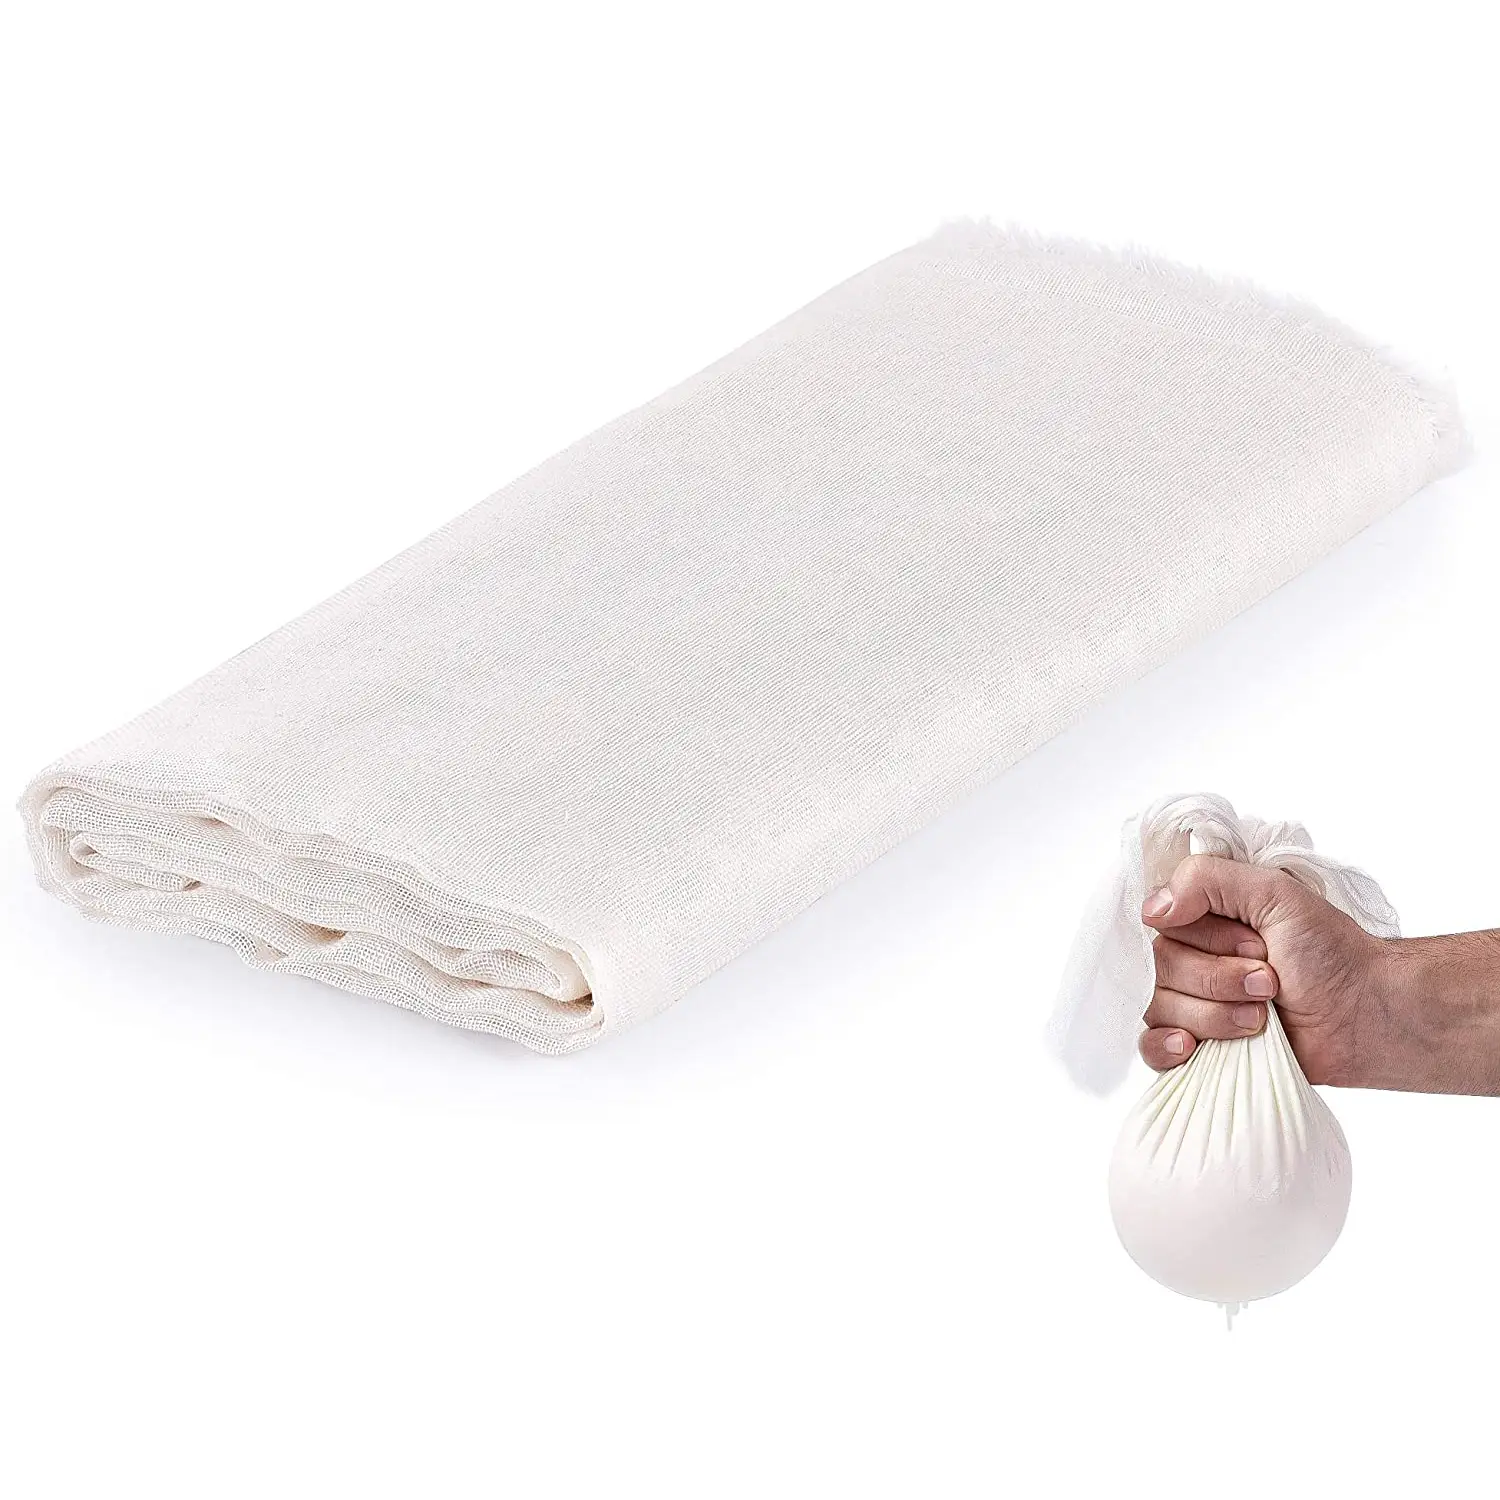 ZK Cheesecloth - Cotton Grade 90 Unbleached